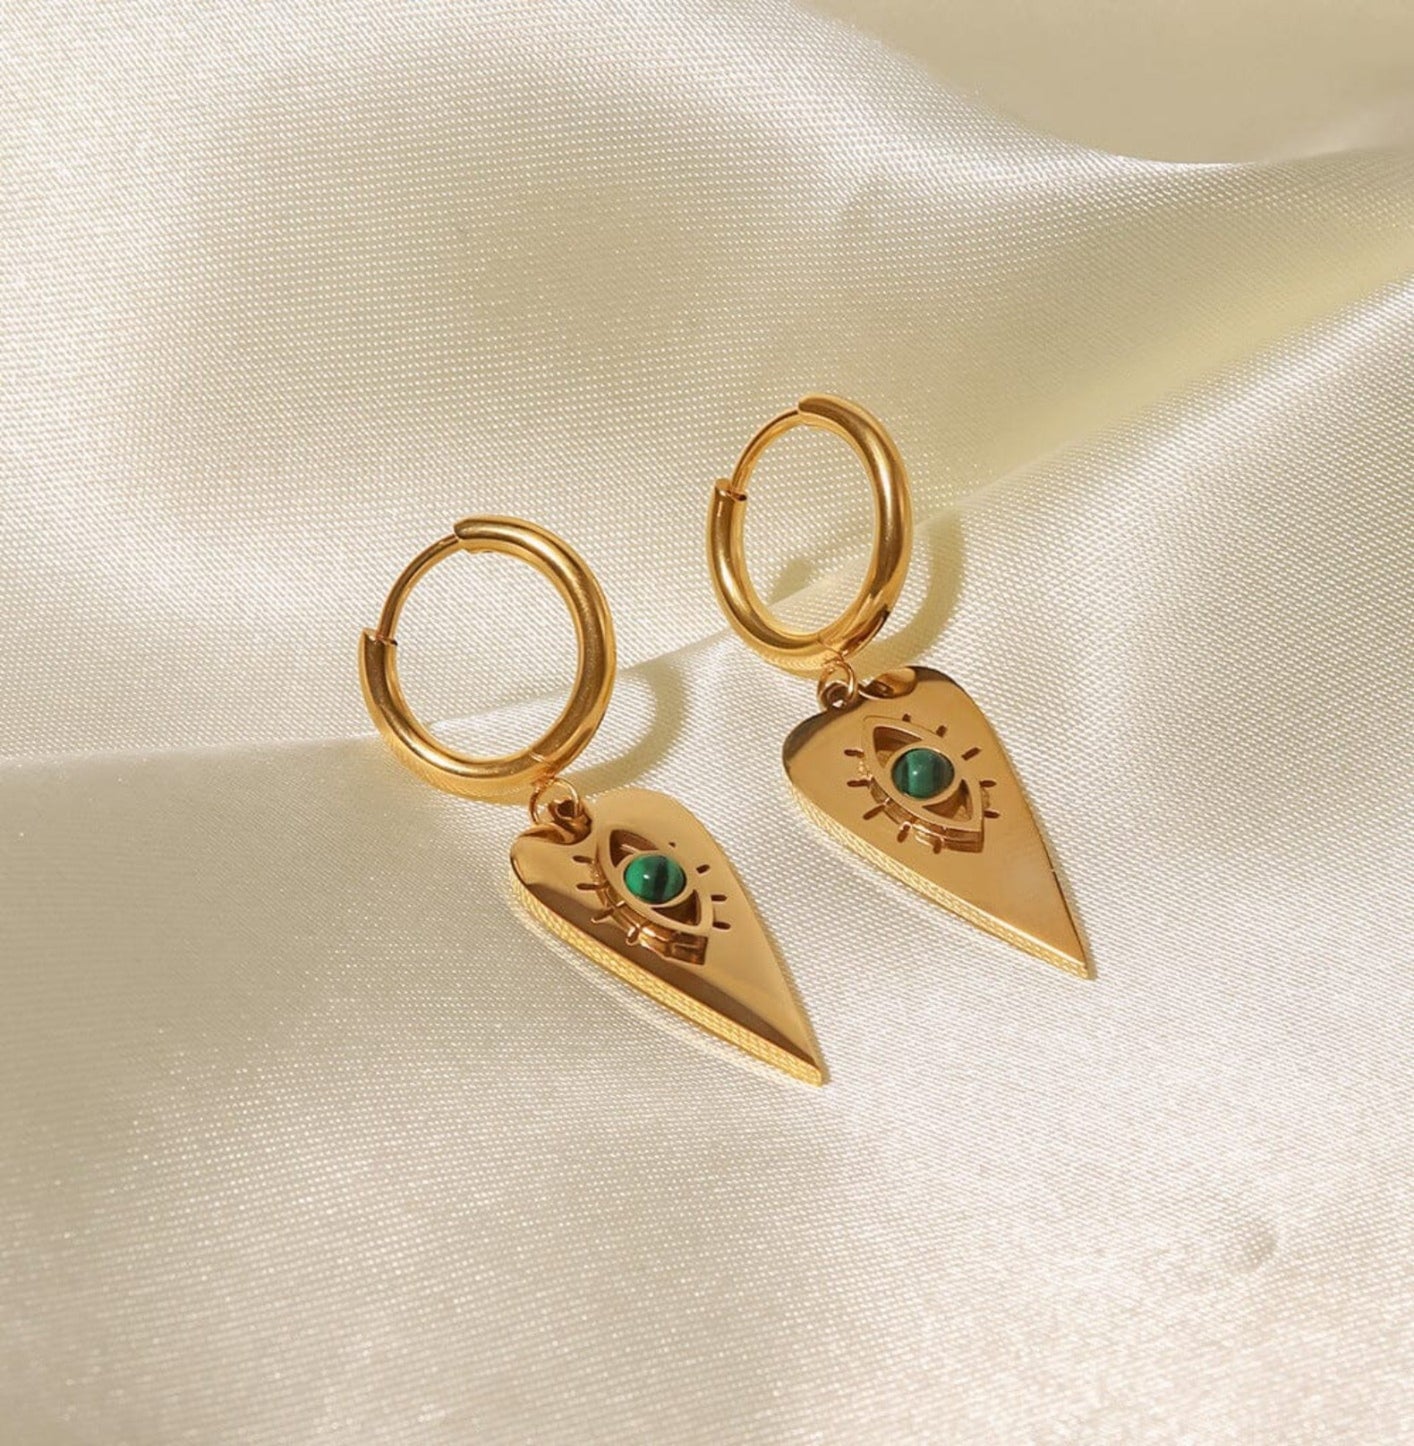 EYES EARRINGS earing Yubama Jewelry Online Store - The Elegant Designs of Gold and Silver ! 